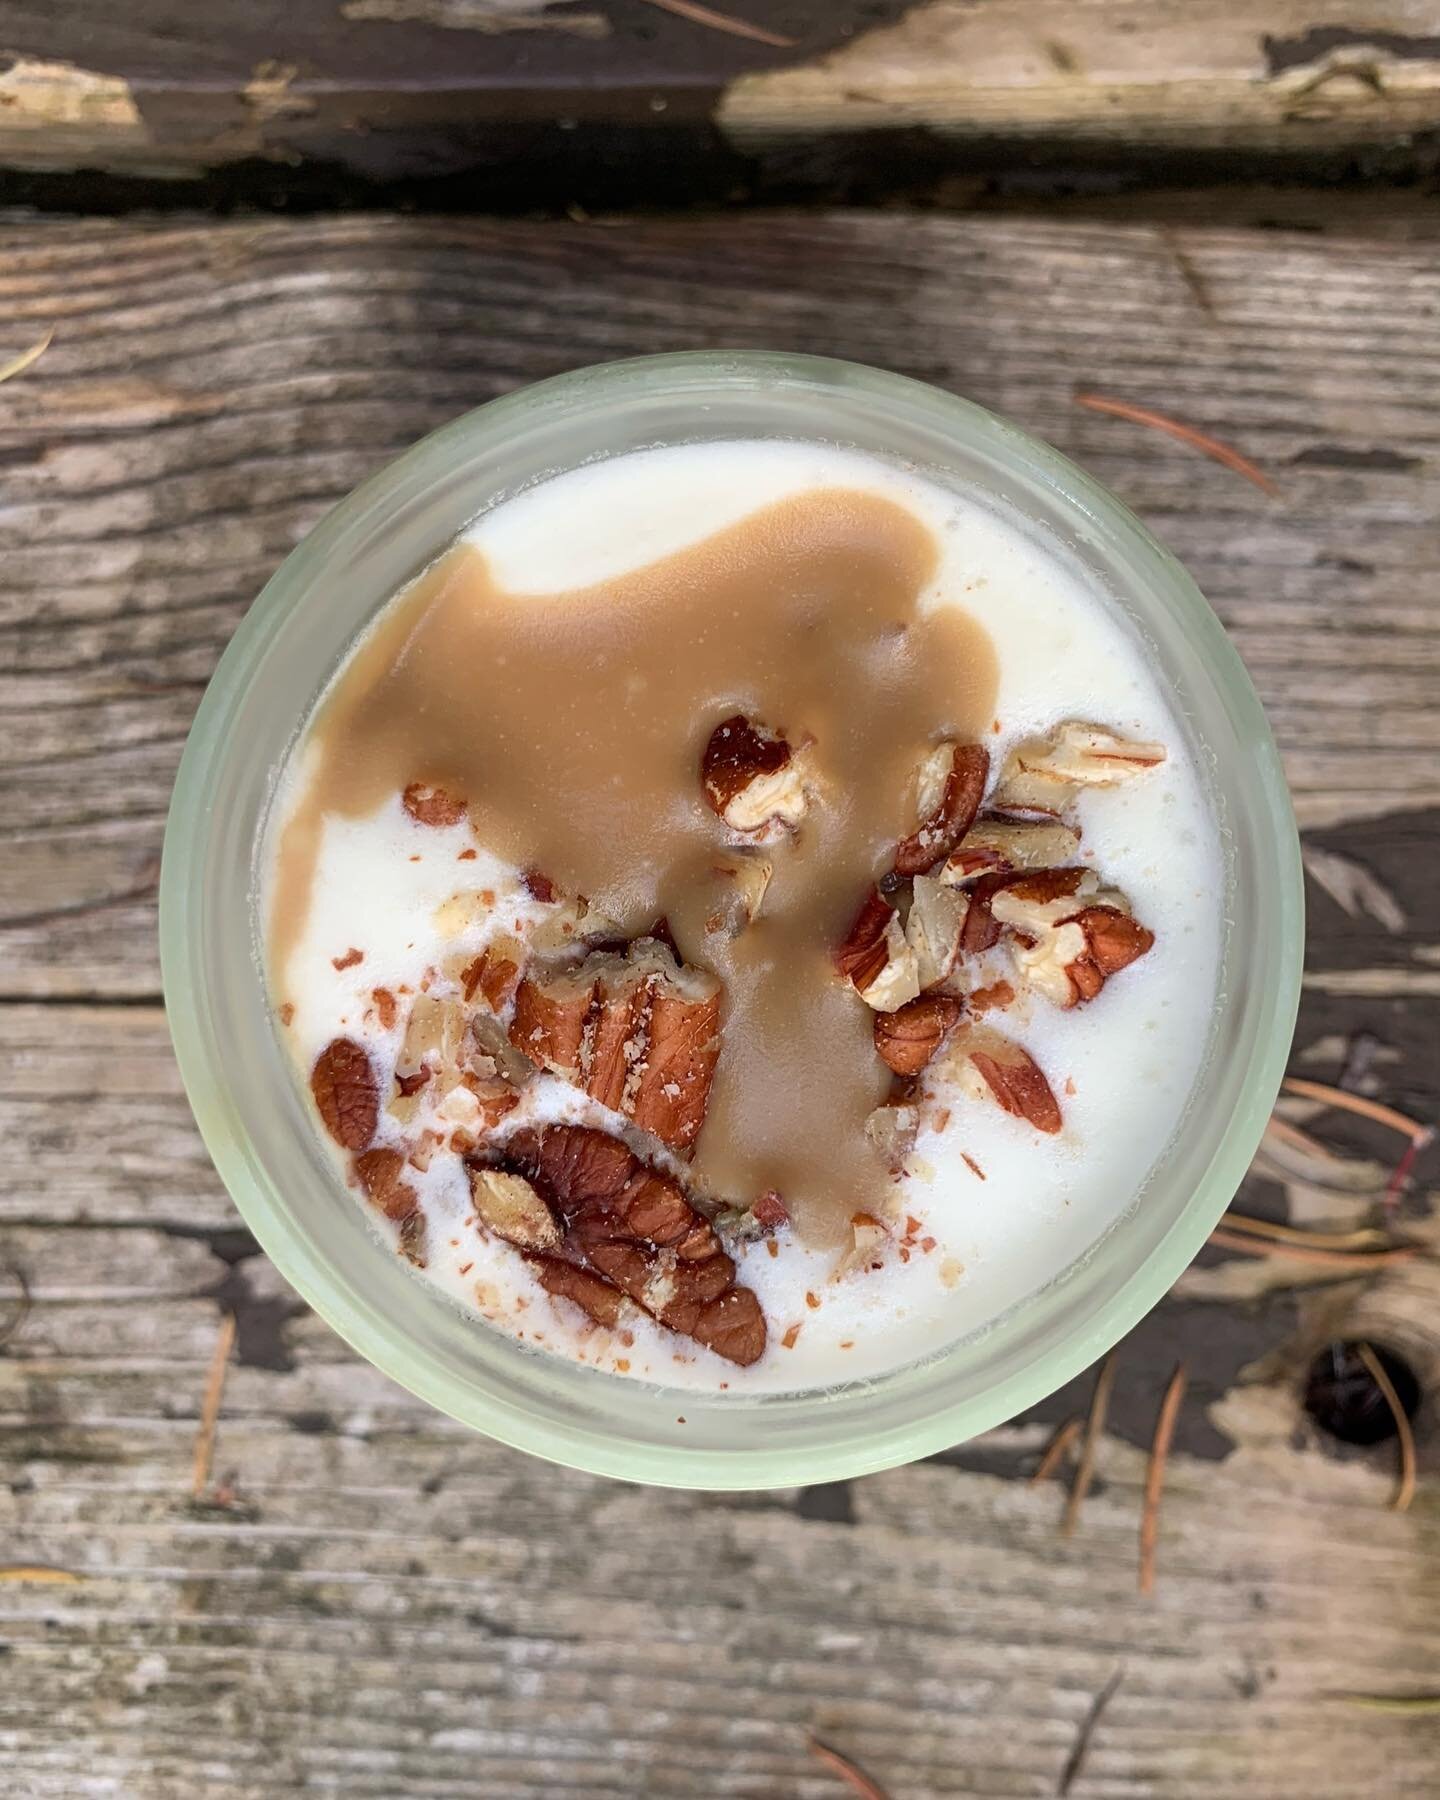 We are open @sundaycider today with sandwiches, sundaes, kids cups and pints. Lots of the very popular Whiskey Toffee Pecan pints still available!